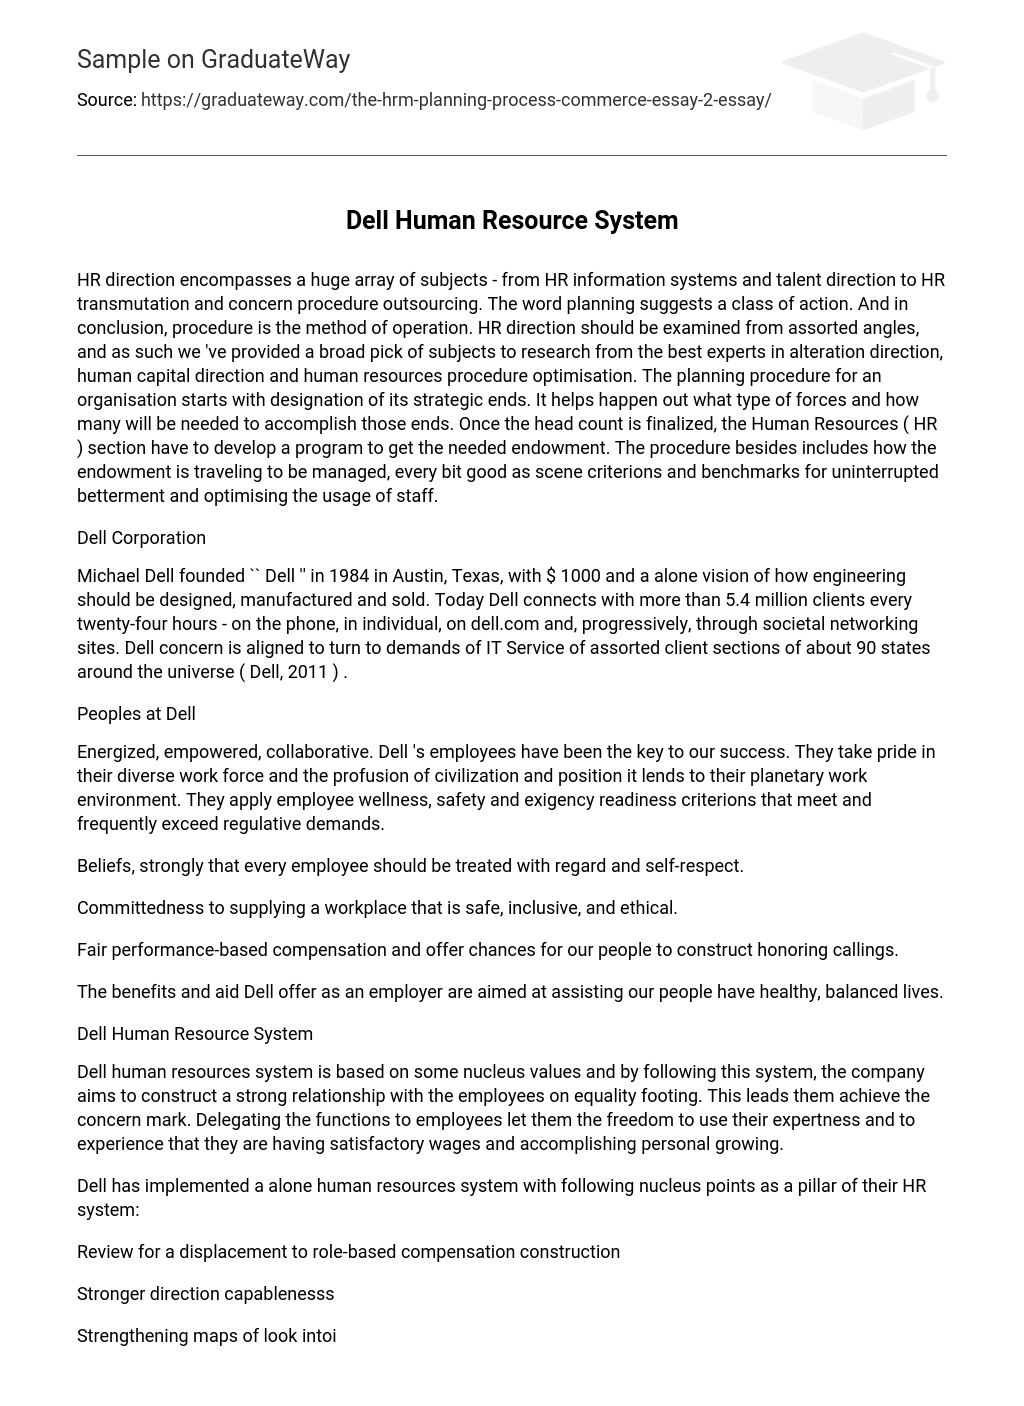 Dell Human Resource System